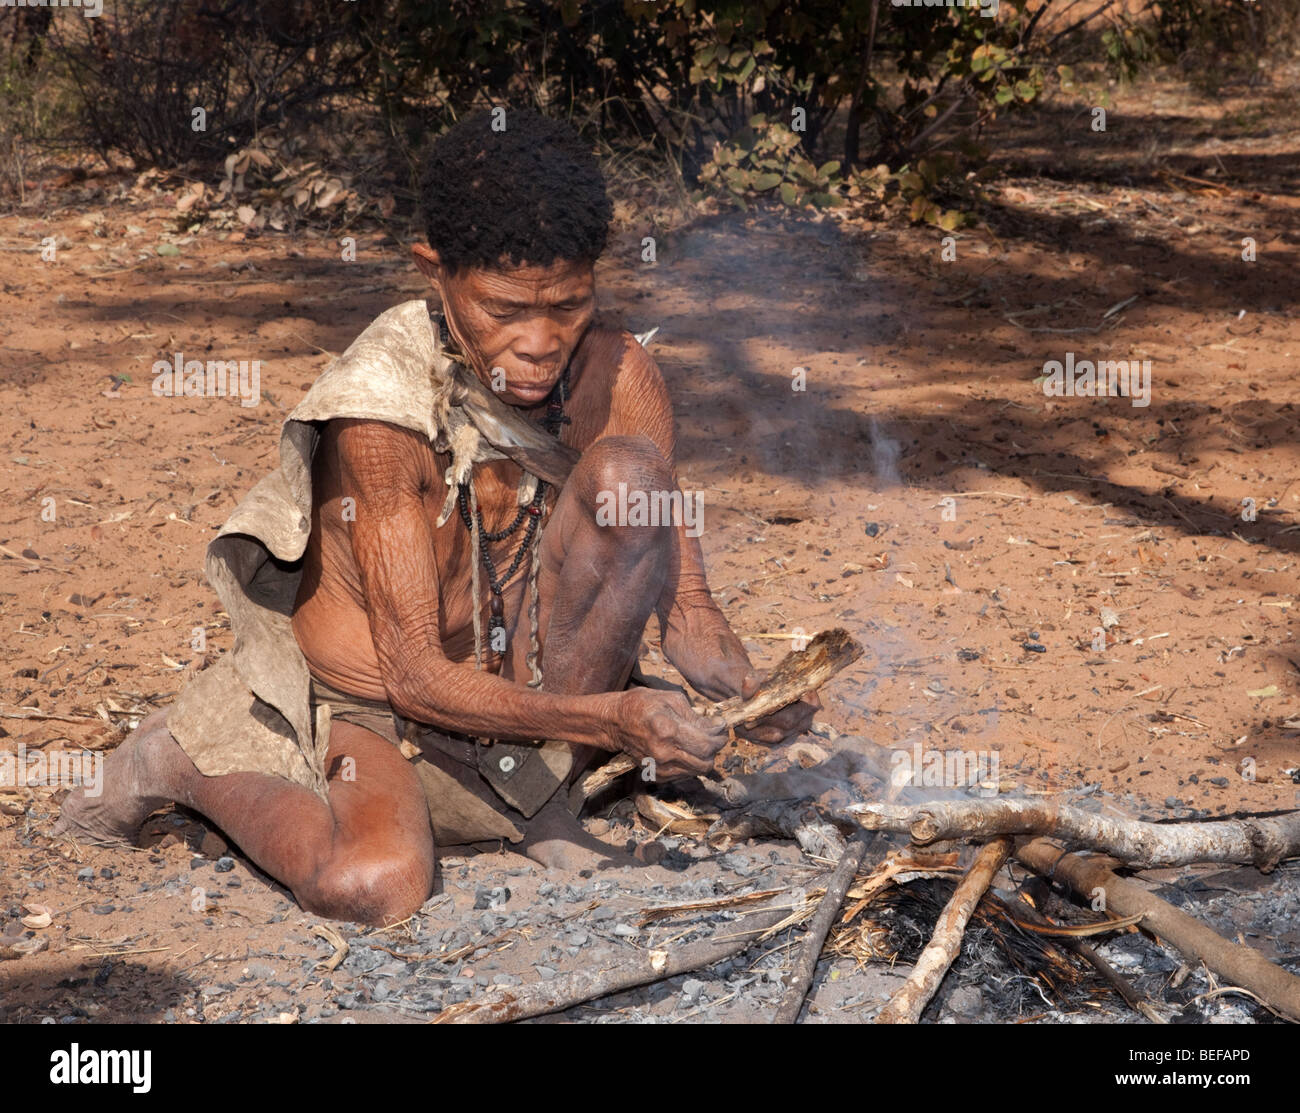 San Village. Making fire the old fashioned way. Stock Photo